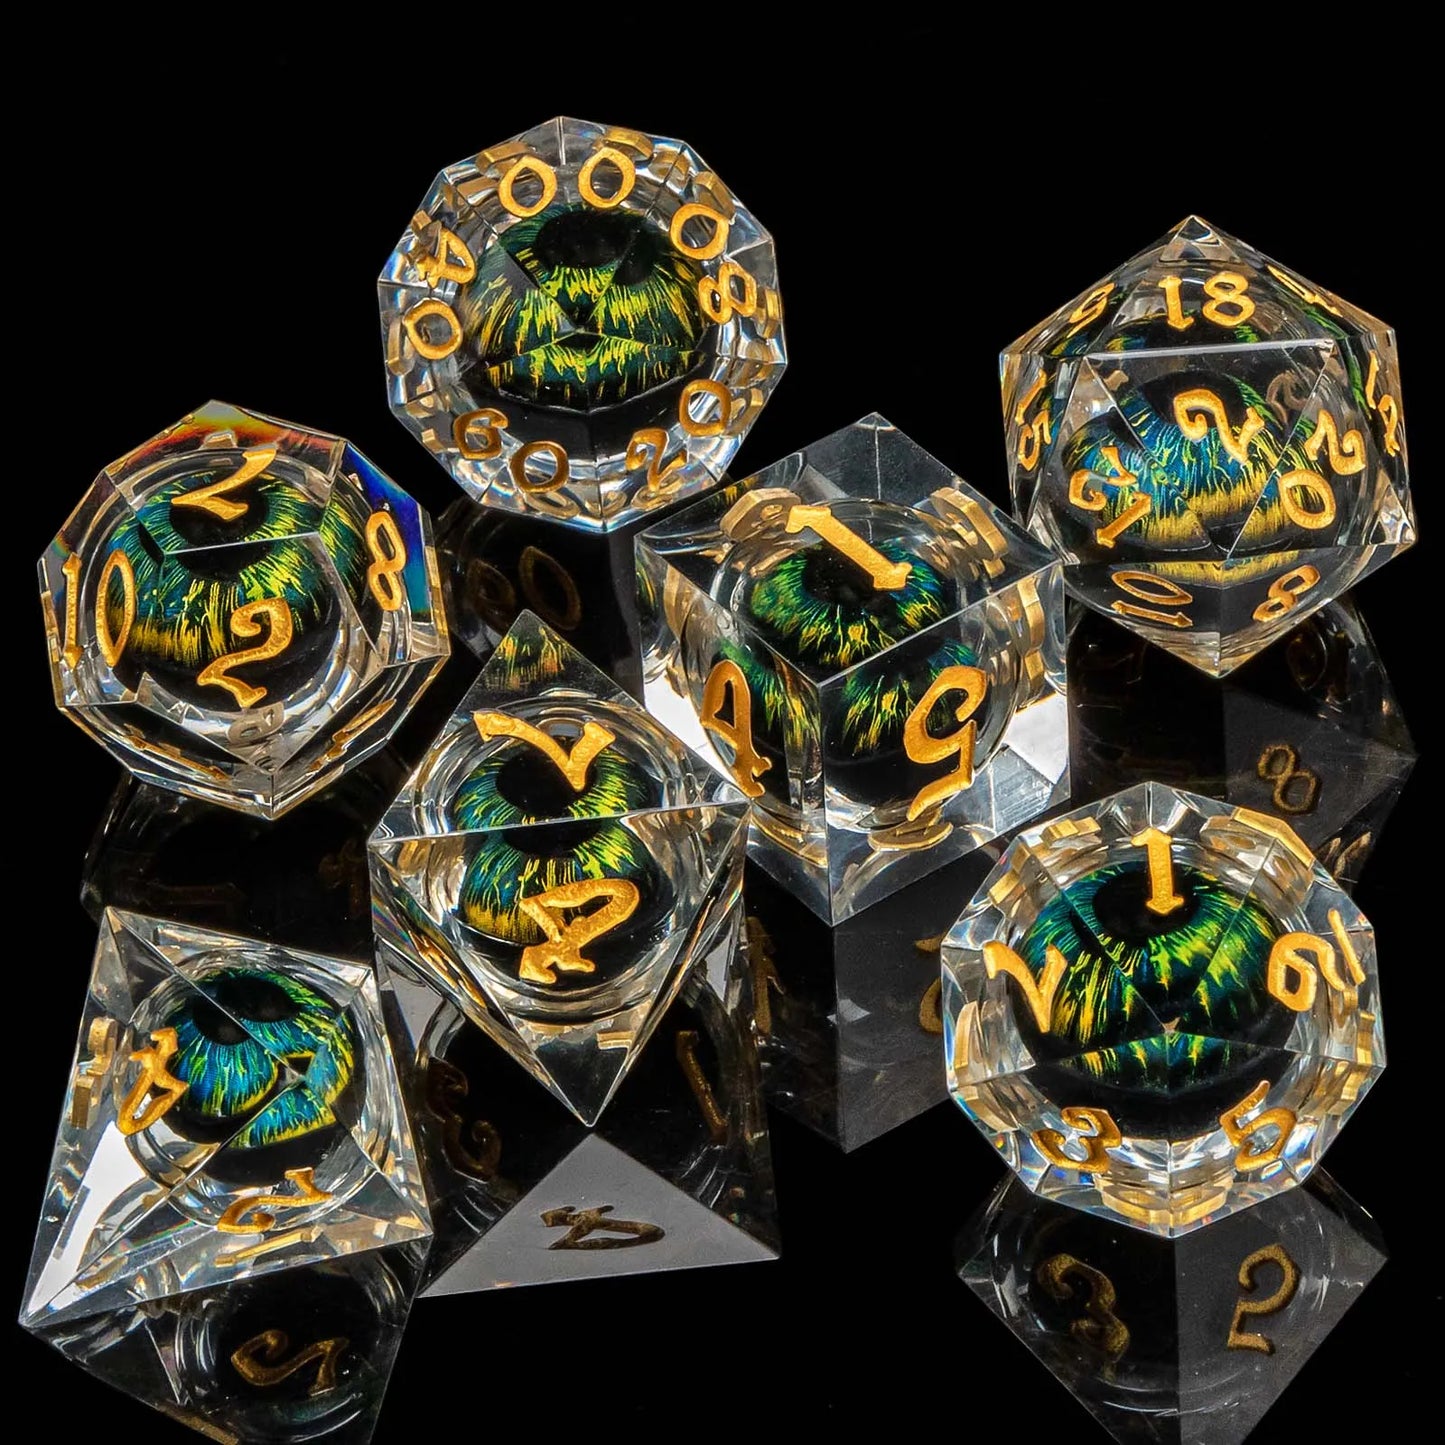 D and D Flowing Sand Sharp Edge Dragon Eye Dnd Resin RPG Polyhedral D&D Dice Set For Dungeon and Dragon Pathfinder Role Playing AZ05